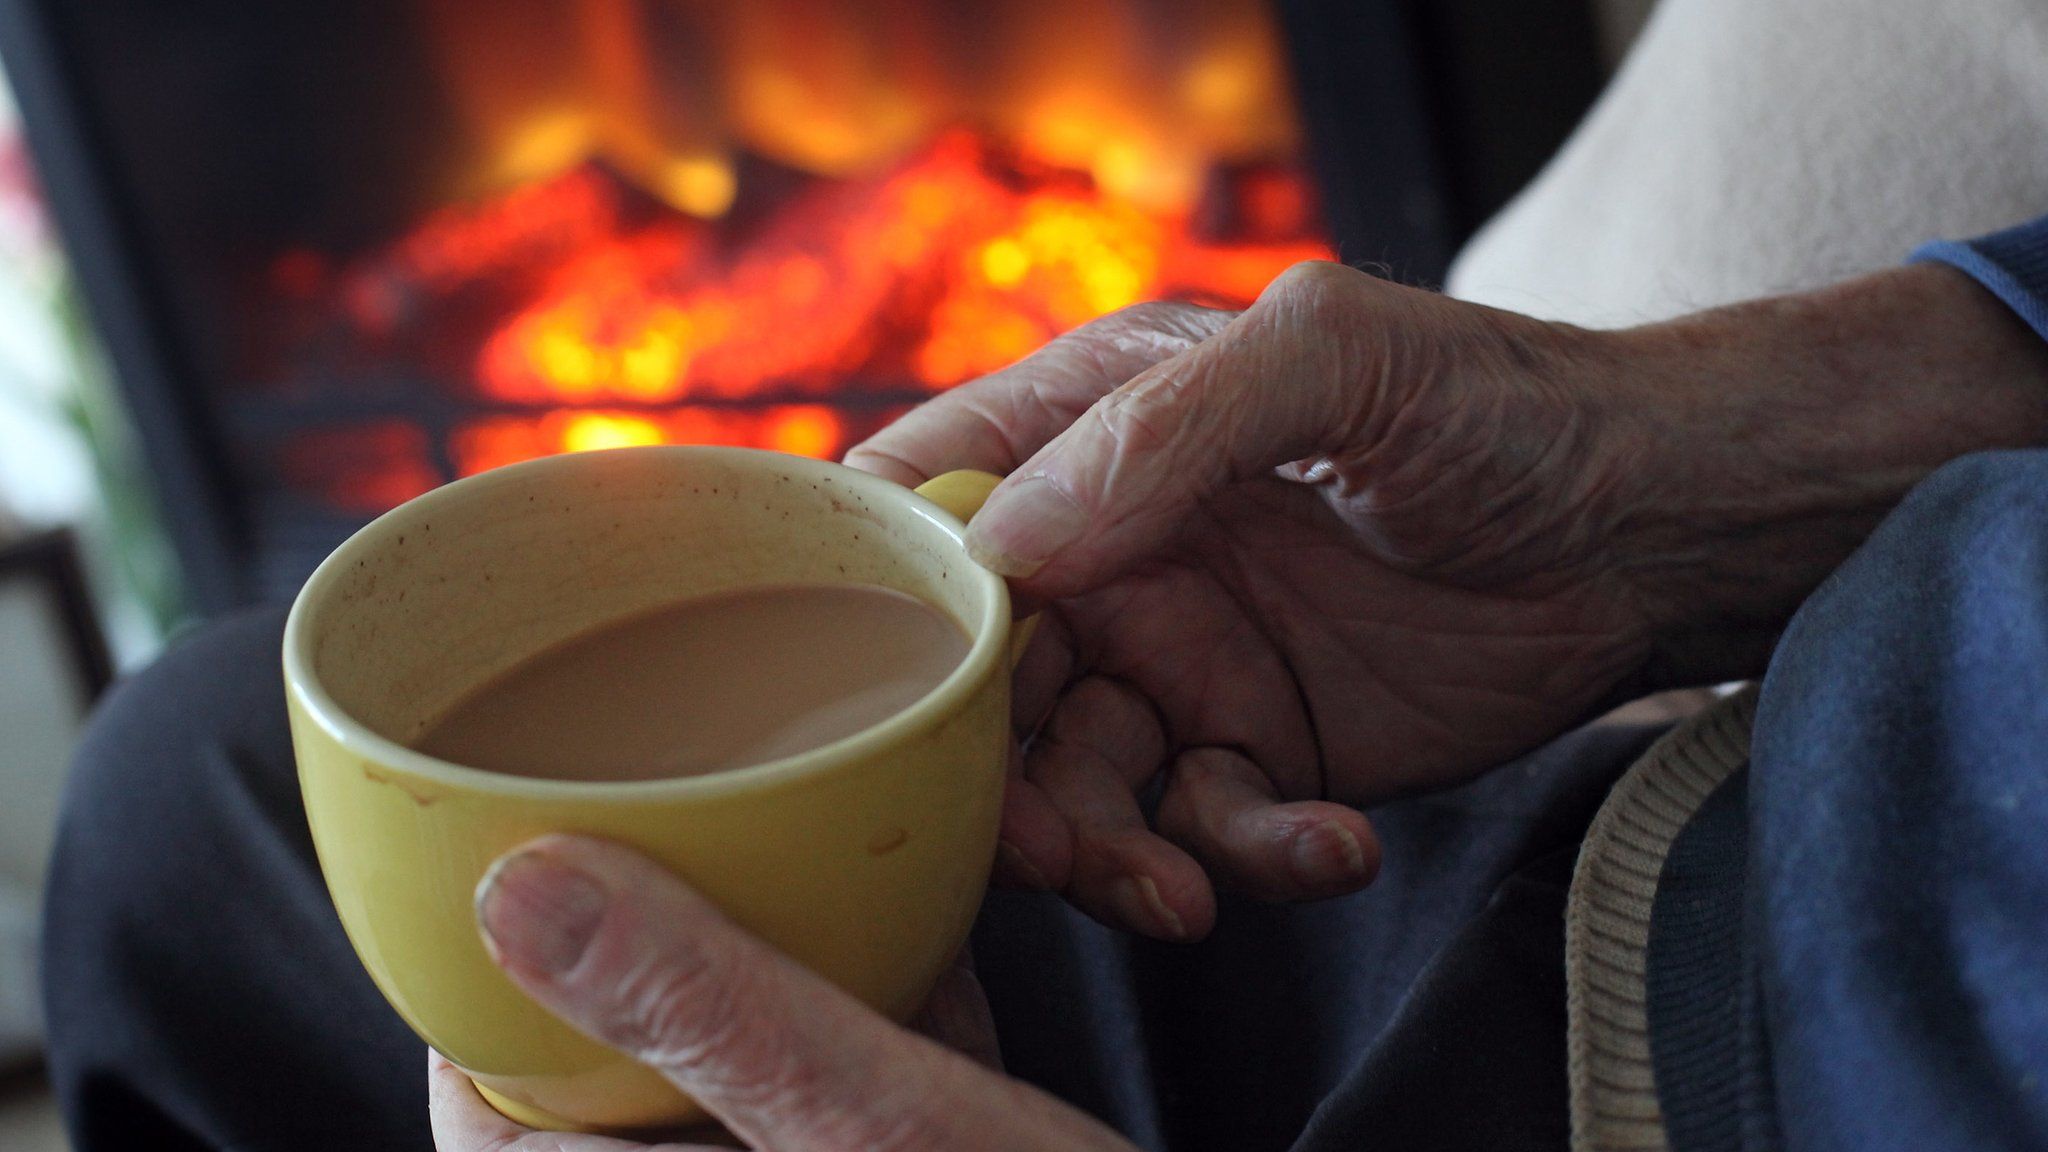 woman holds cup of tea by fire